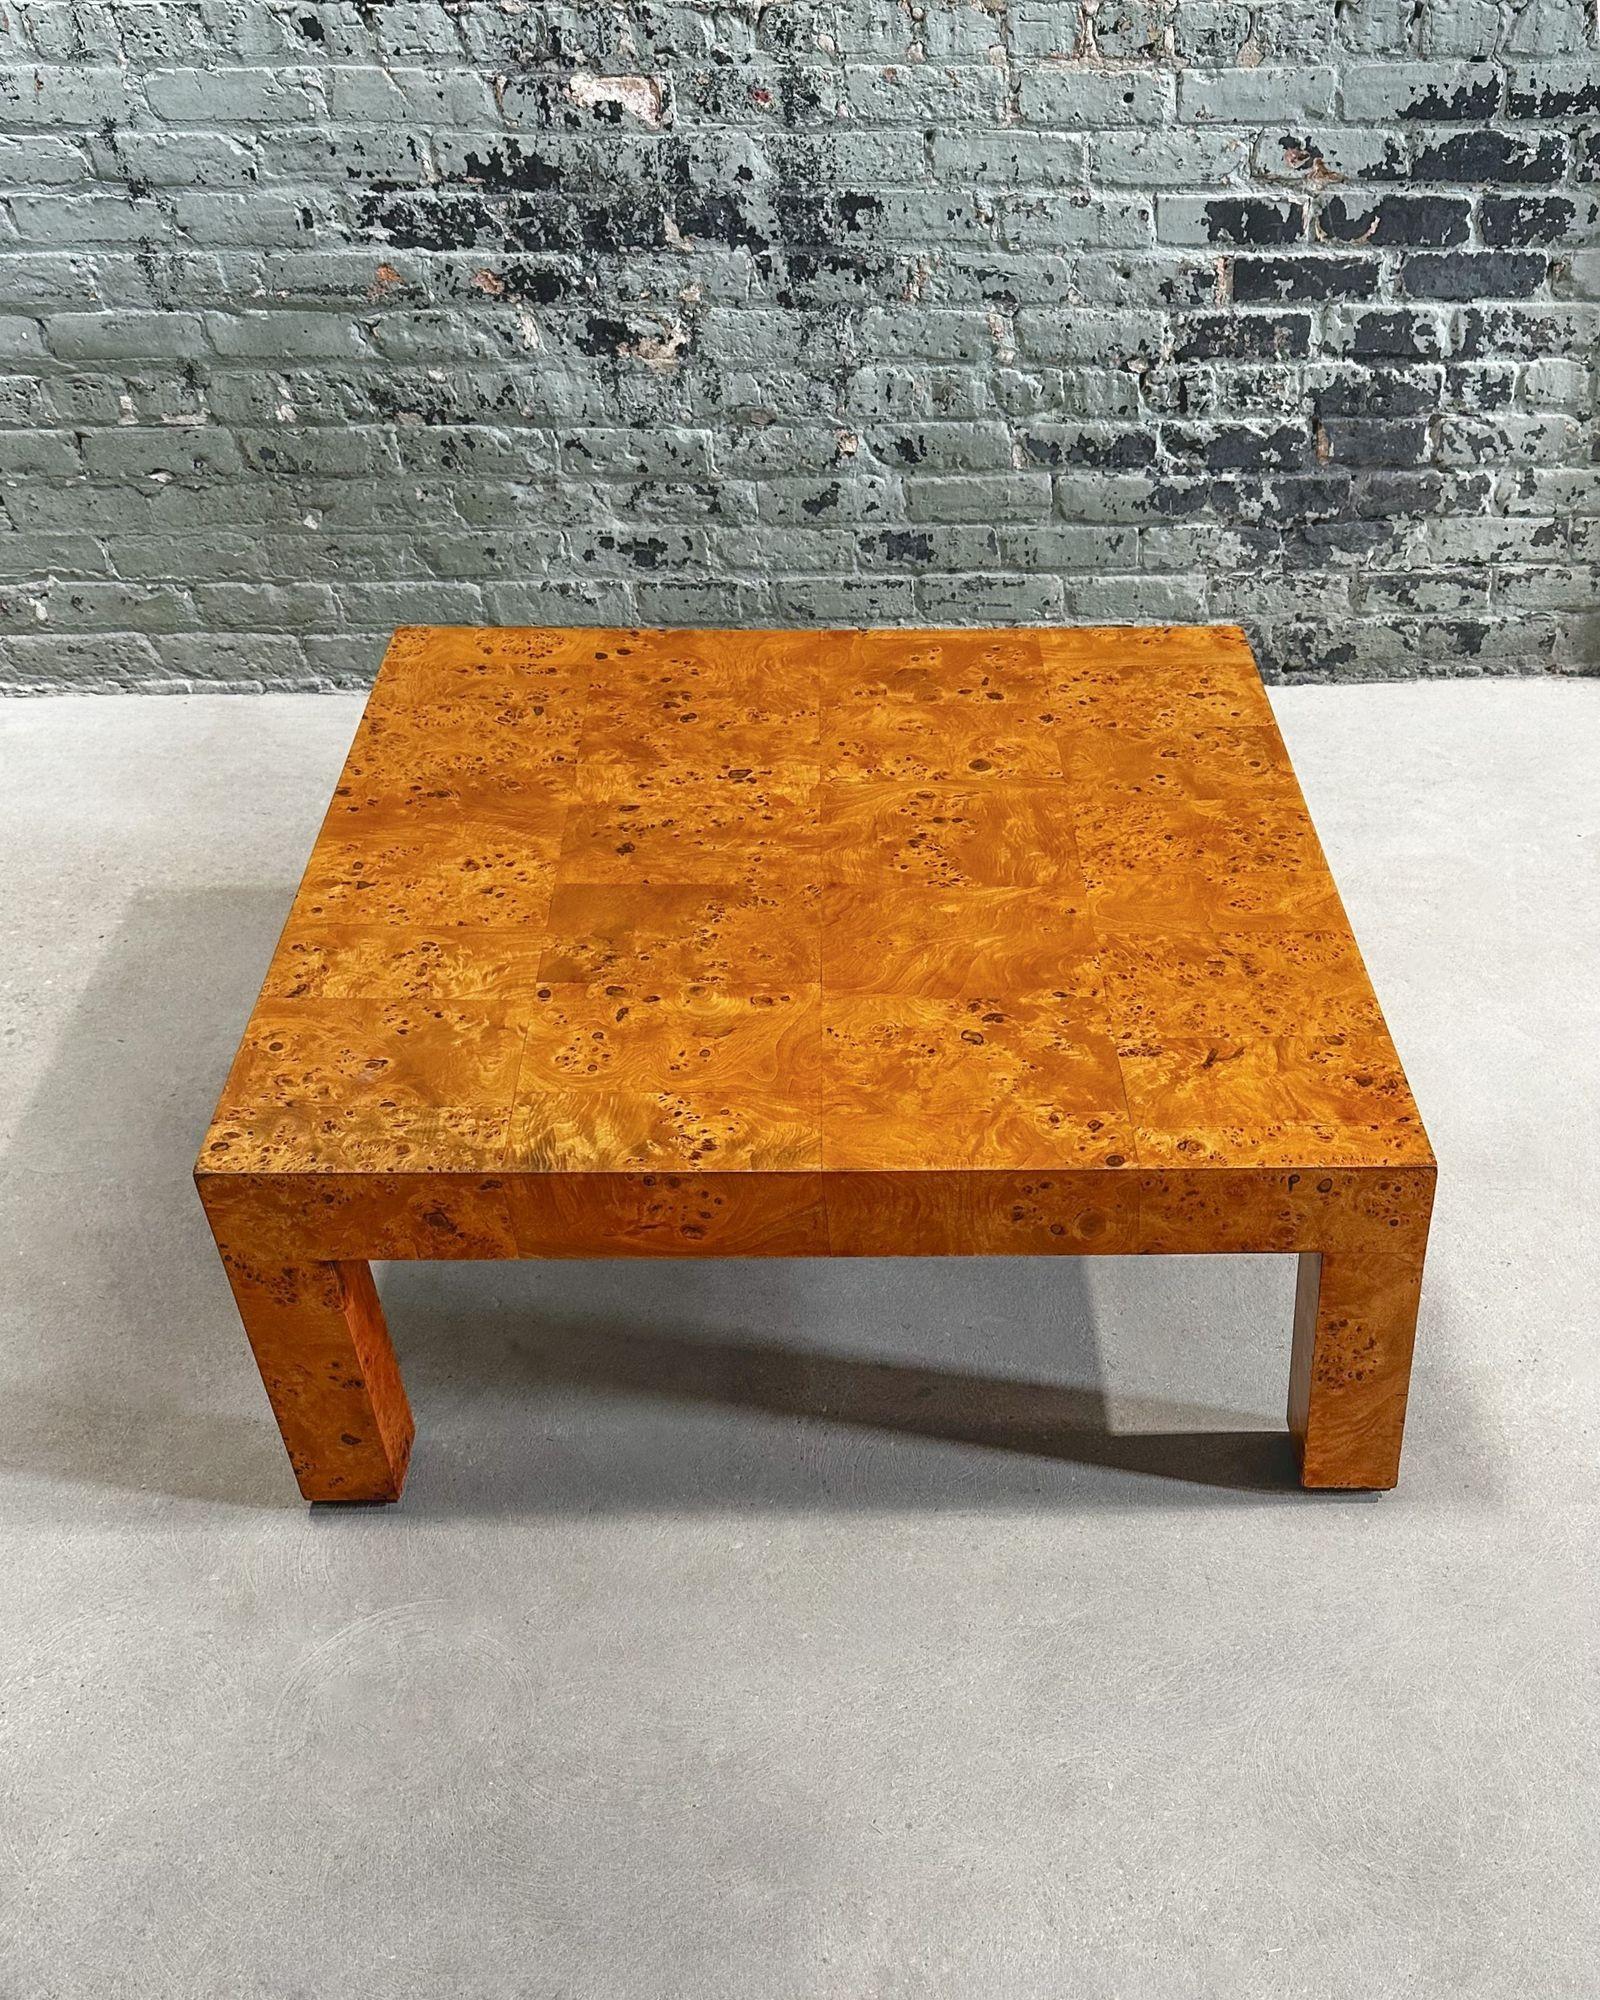 Milo Baughman Burlwood Parsons Coffee Table, 1970. Table has been completely restored.
Measures 39